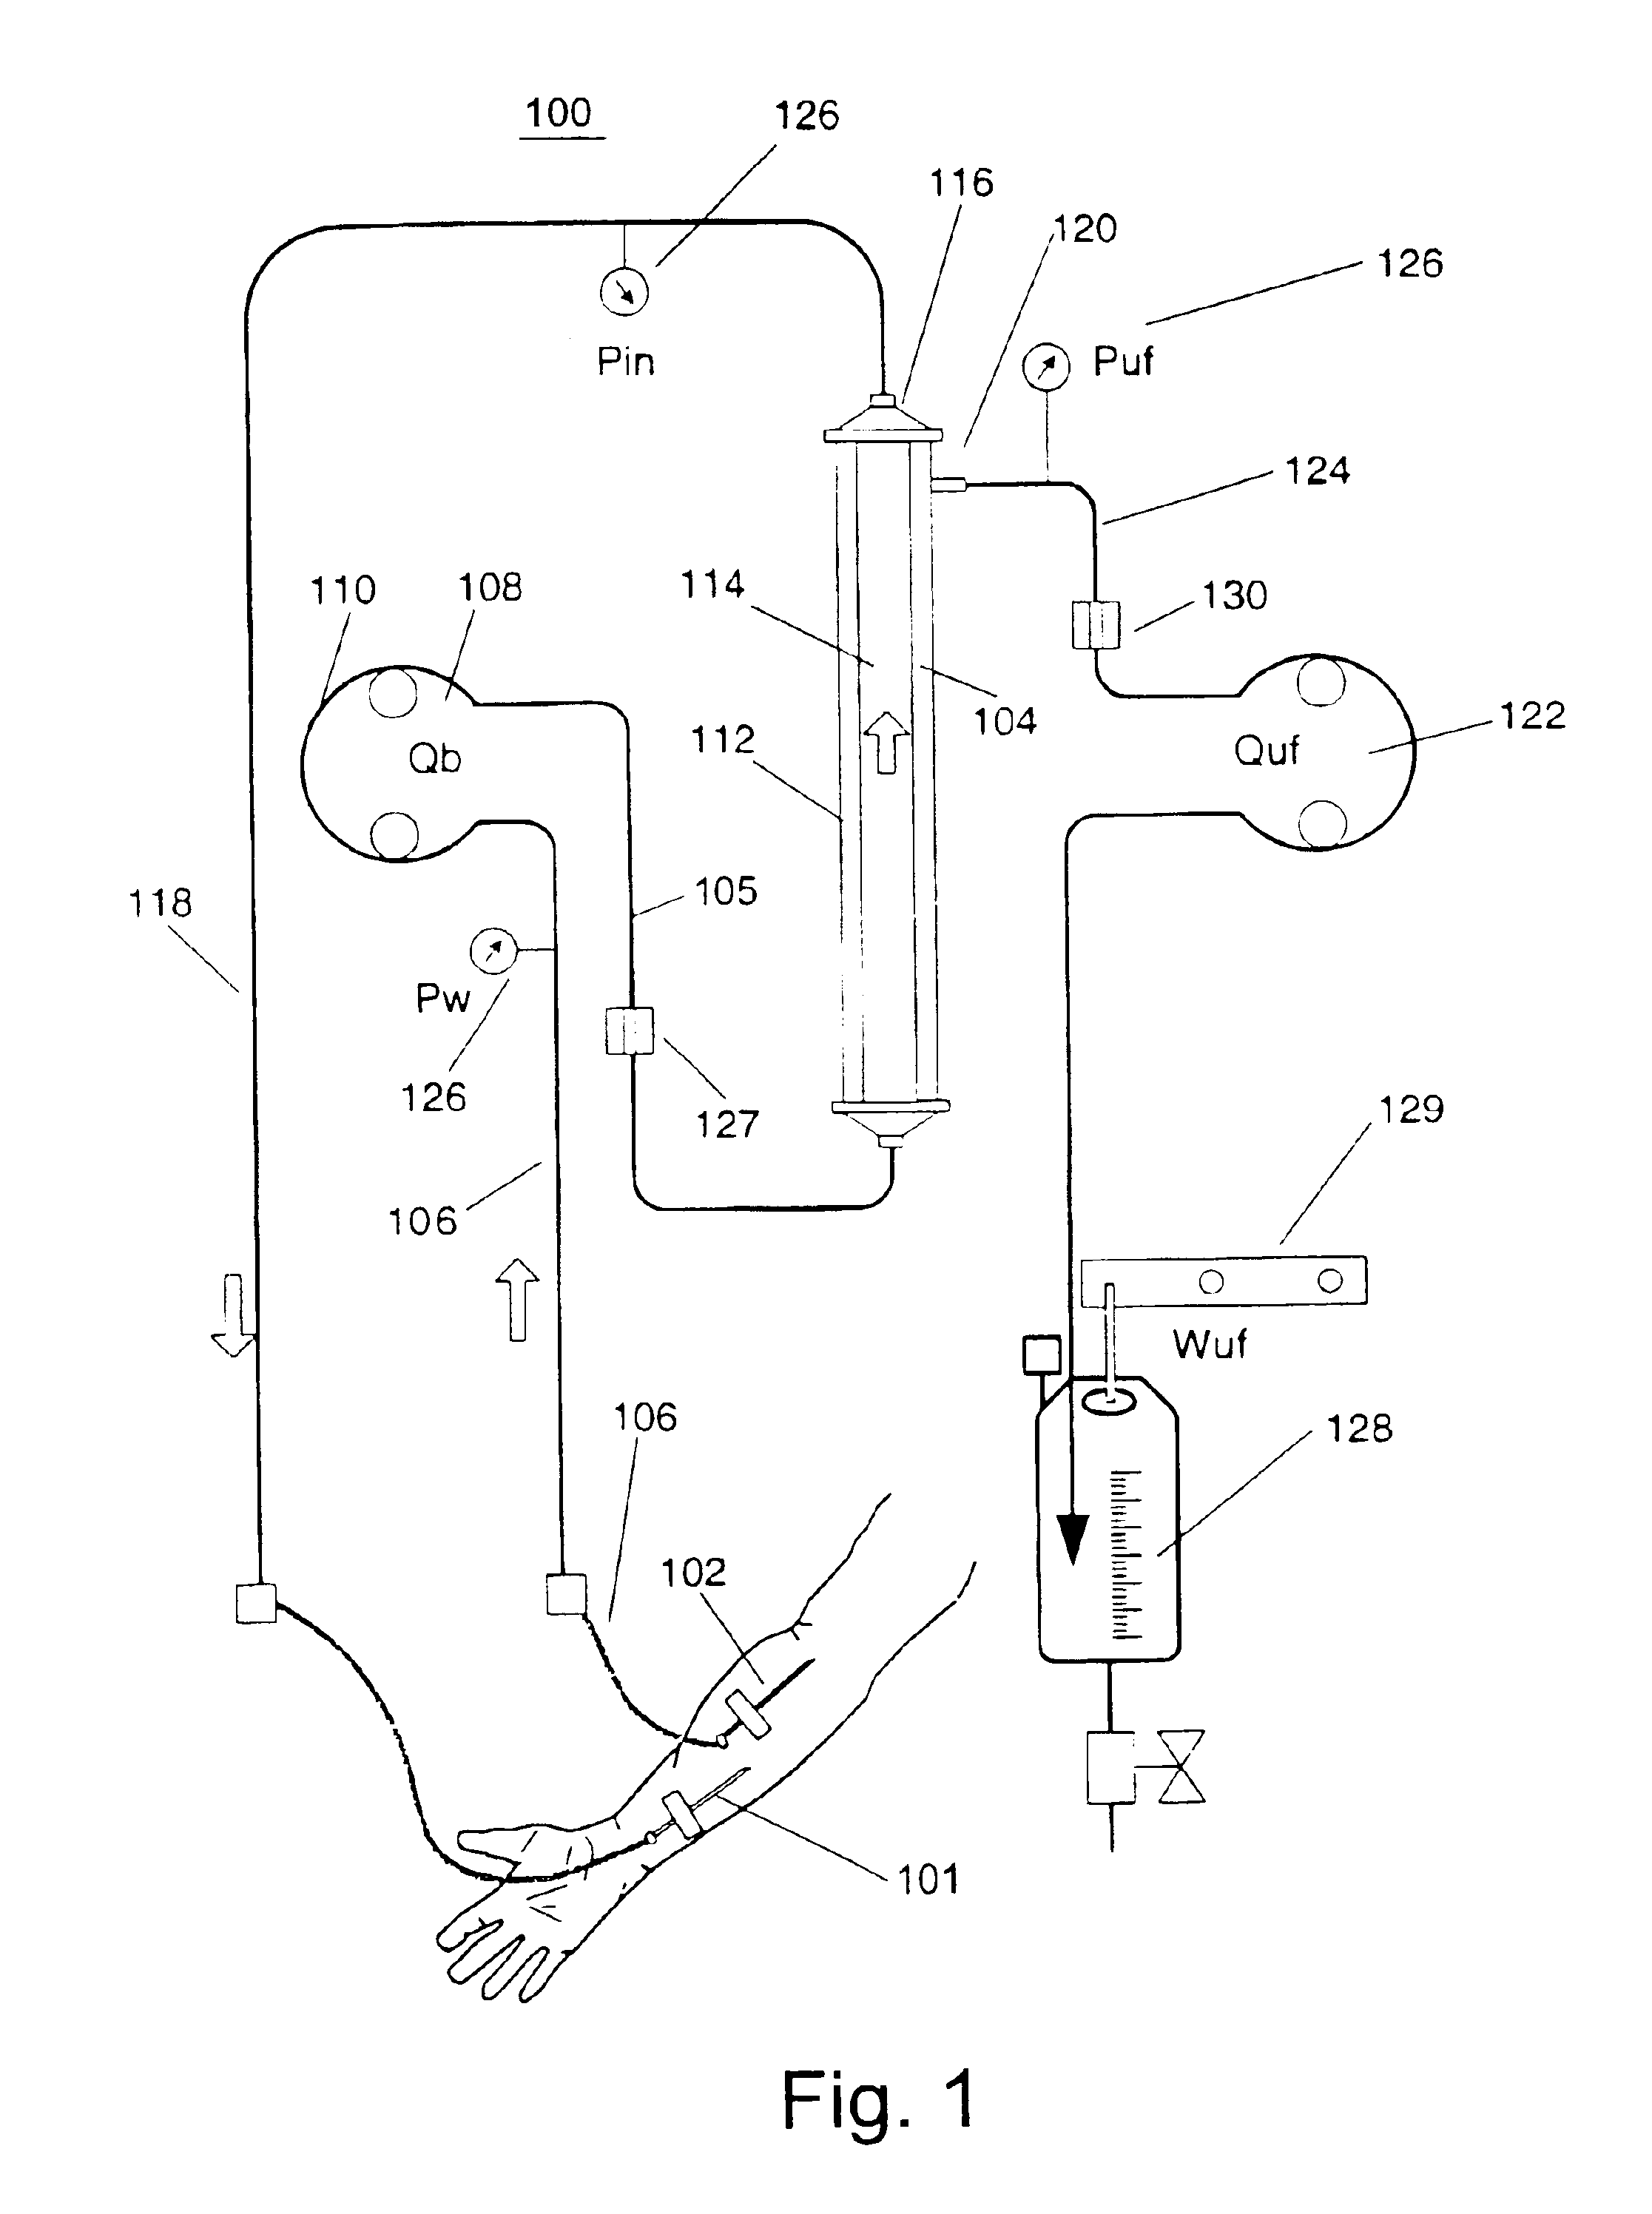 Blood leak detector for extracorporeal treatment system